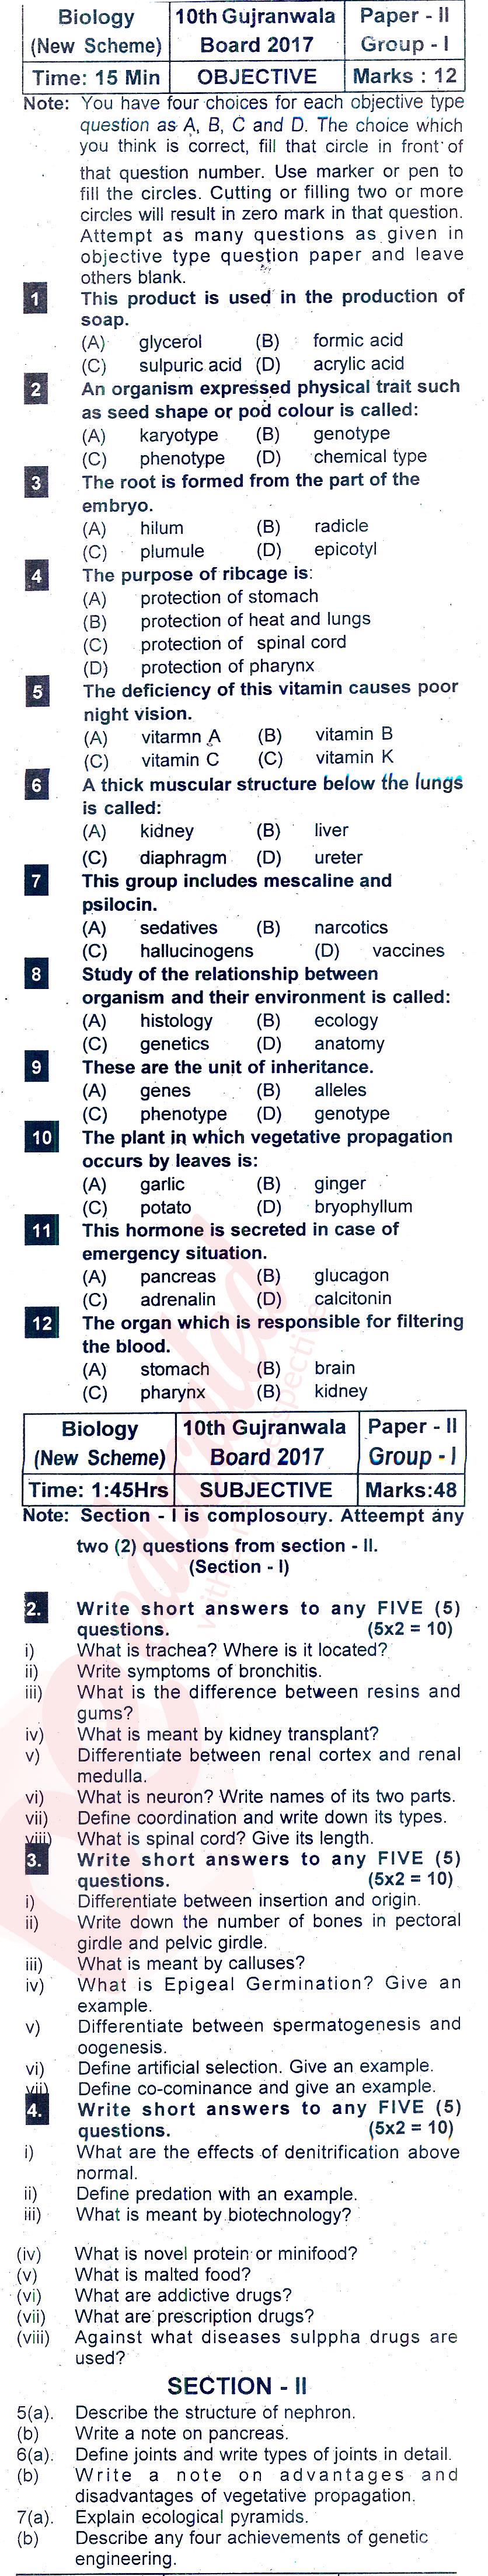 Biology 10th class Past Paper Group 1 BISE Gujranwala 2017